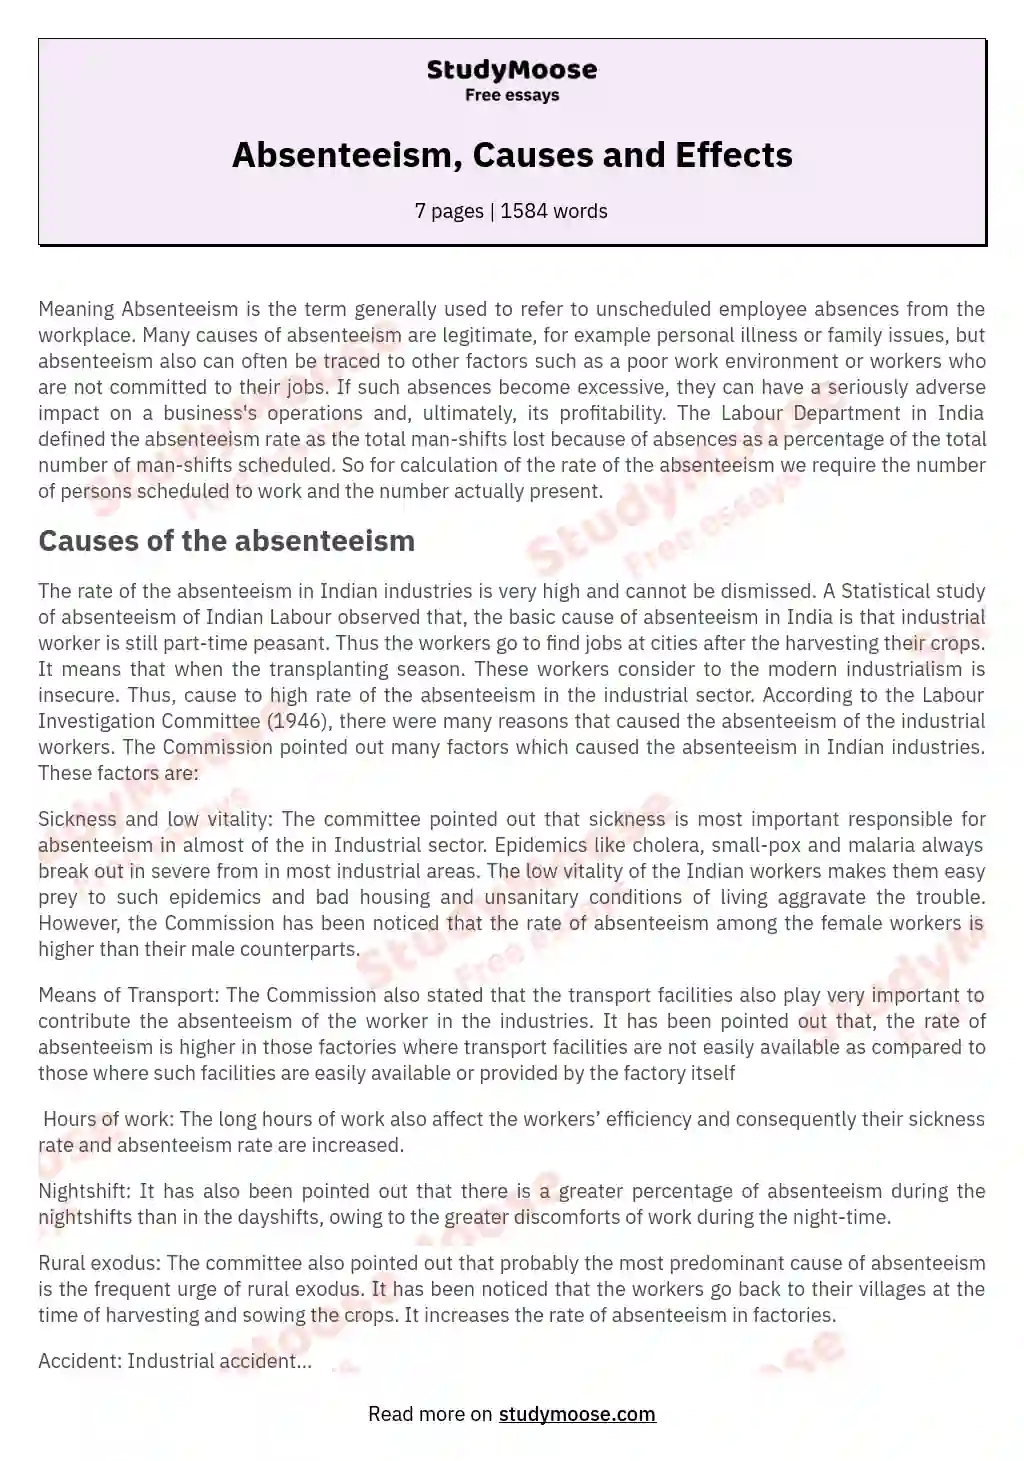 Absenteeism, Causes and Effects essay